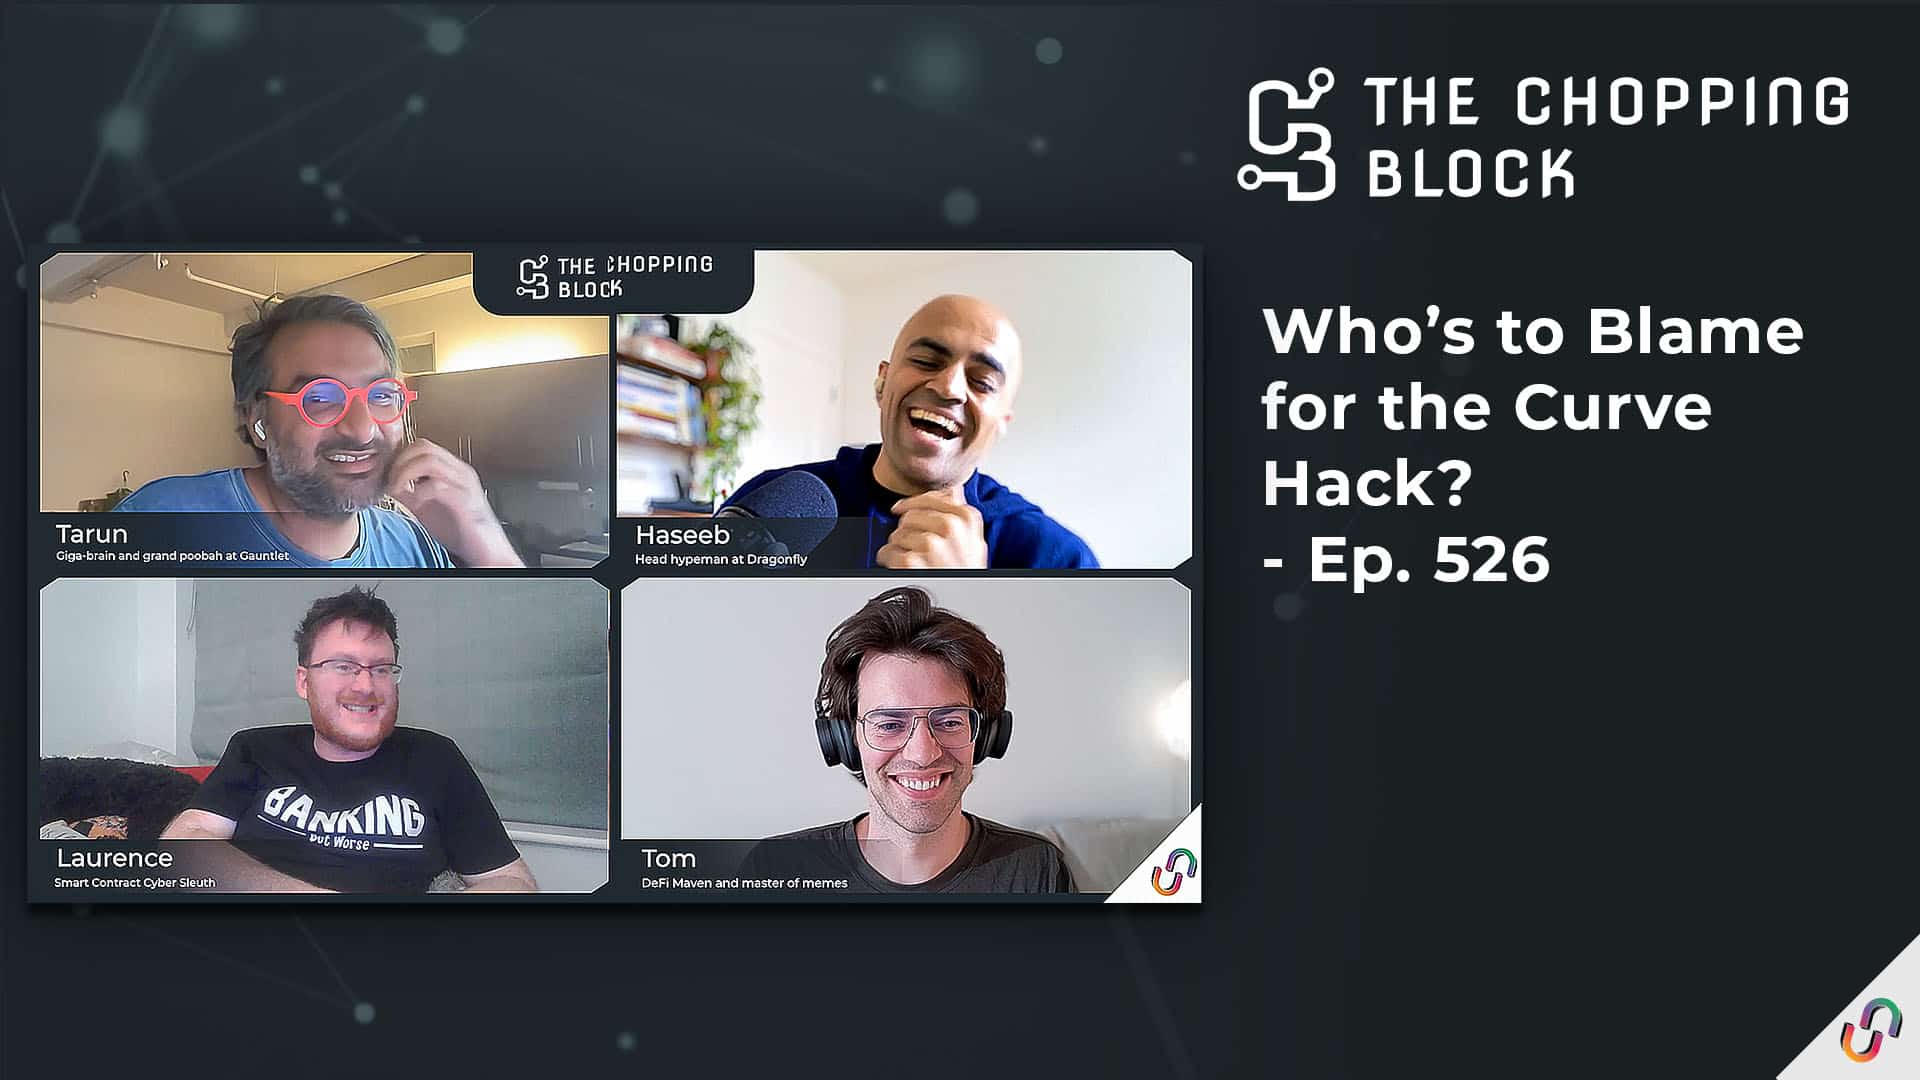 The Chopping Block: Who’s to Blame for the Curve Hack? - Ep. 526